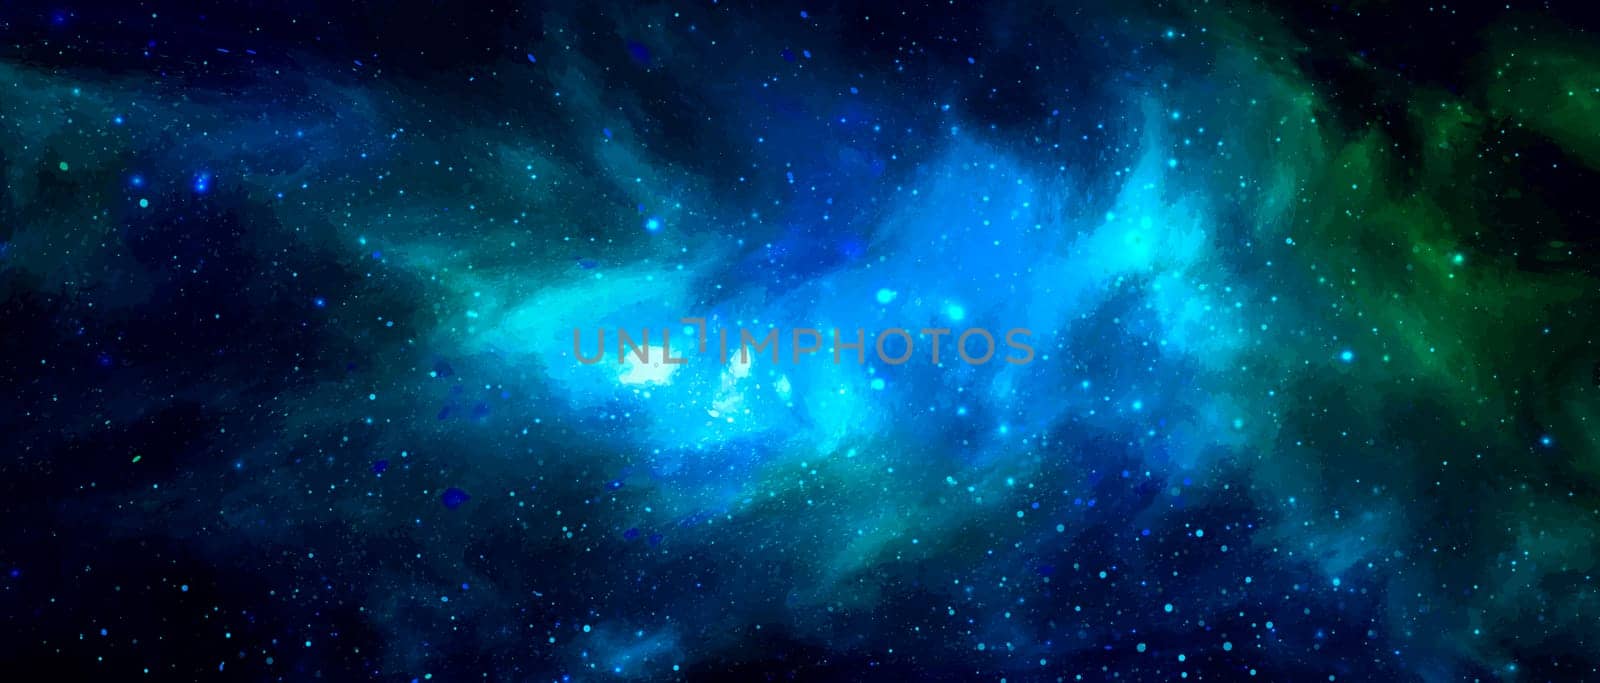 Space background with realistic nebula and shining stars. Magic colorful galaxy with stardust by Whatawin